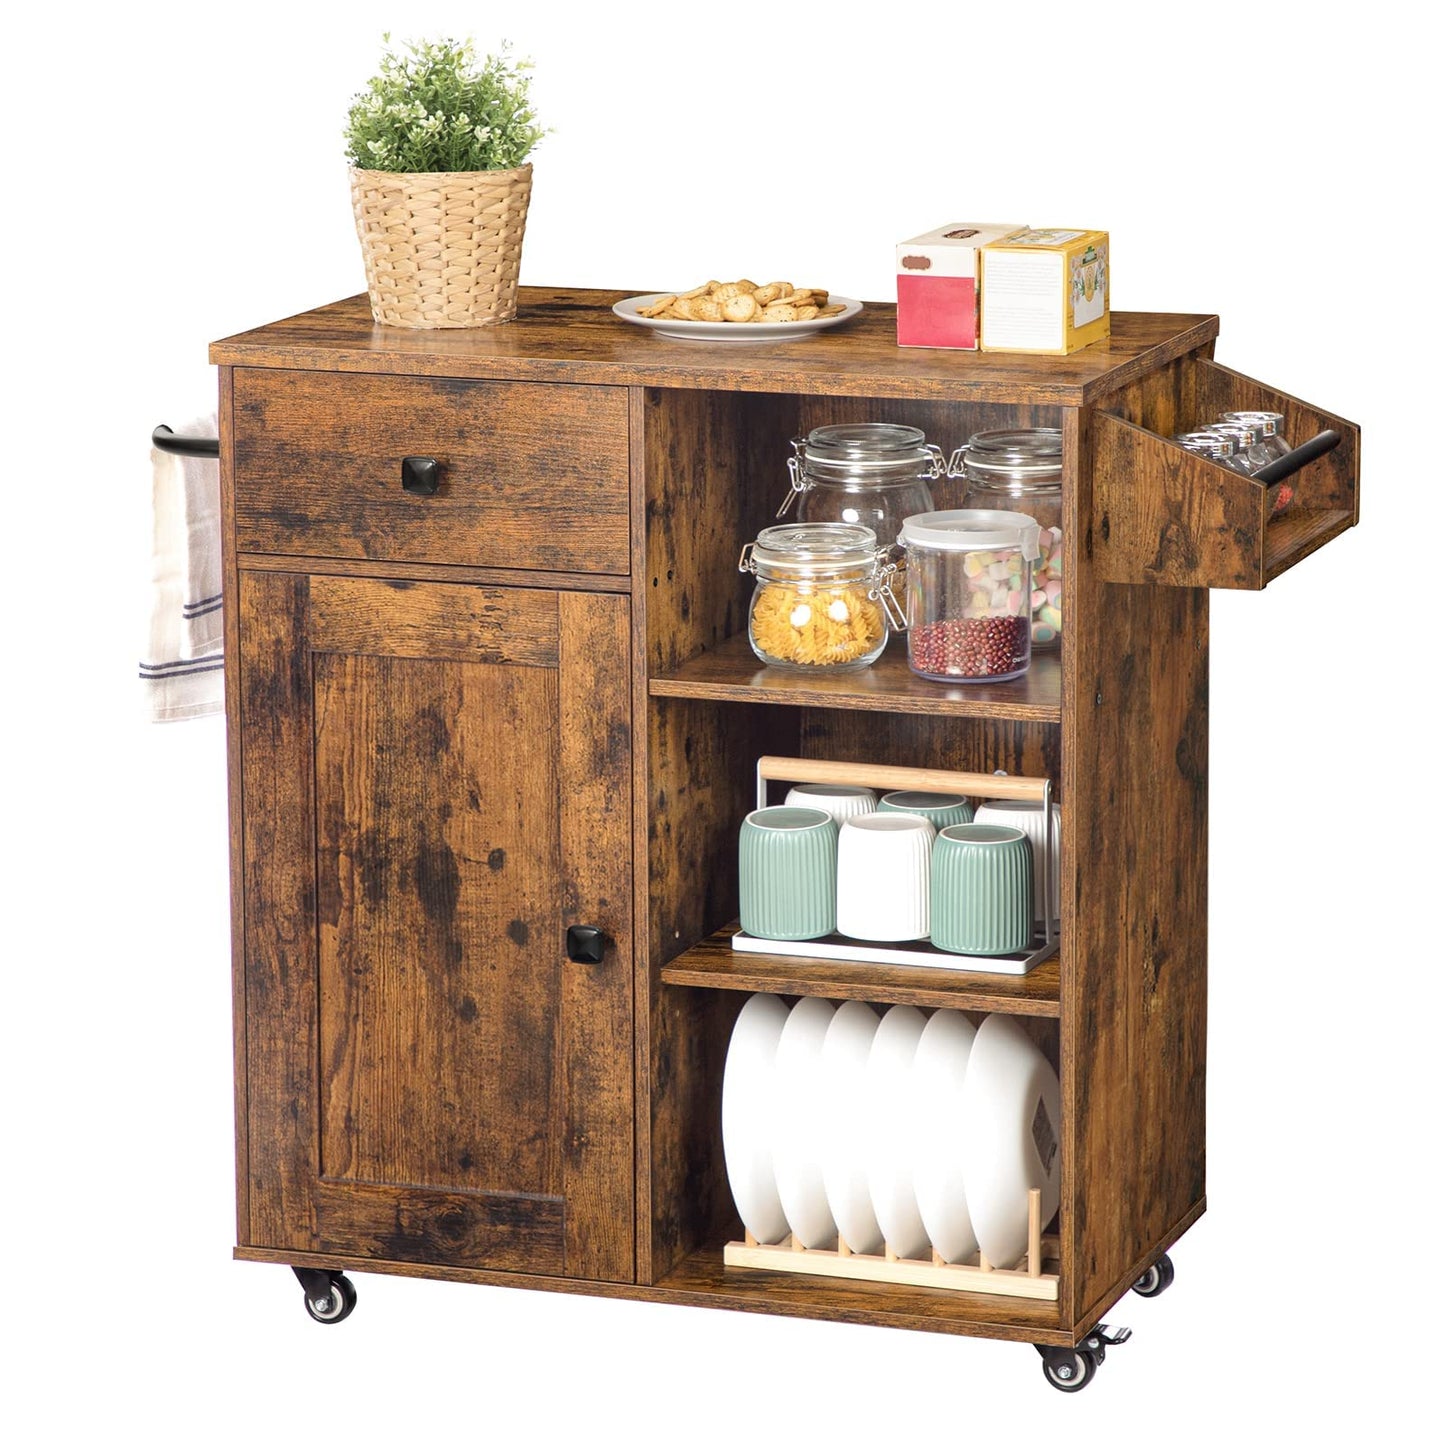 HOOBRO Kitchen Island, Storage Cabinet with Drawer, Kitchen Cart with Spice and Towel Rack, Saving Space, Easy Assembly, for Living Room, Rustic Brown BF12ZD01